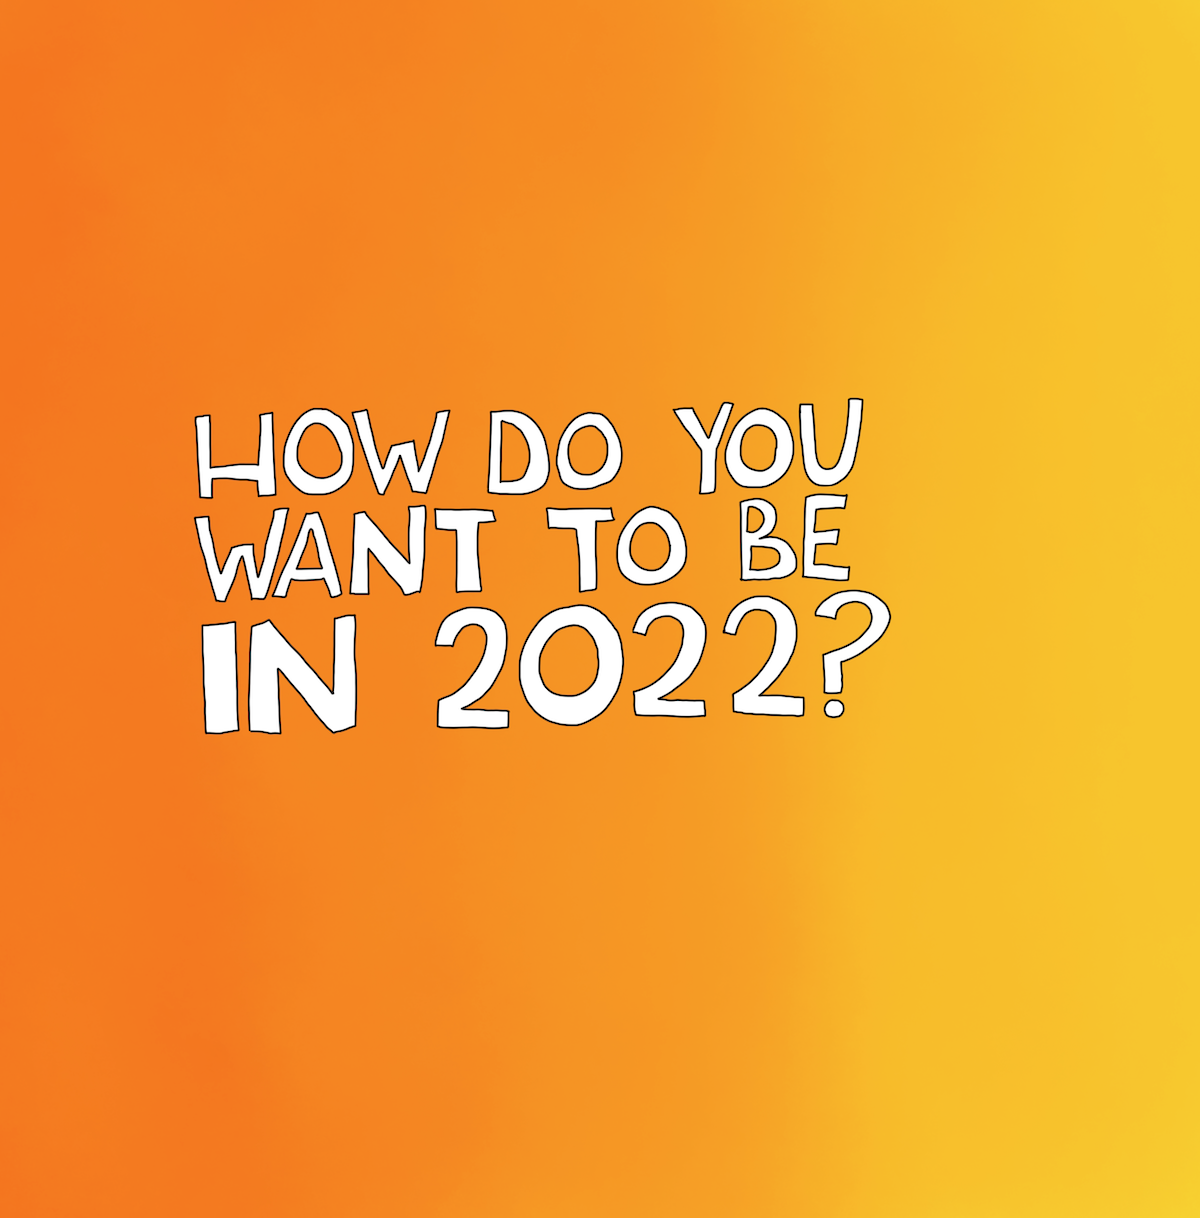 New Year Journaling + Meditation Class: How do you want to BE in 2022?